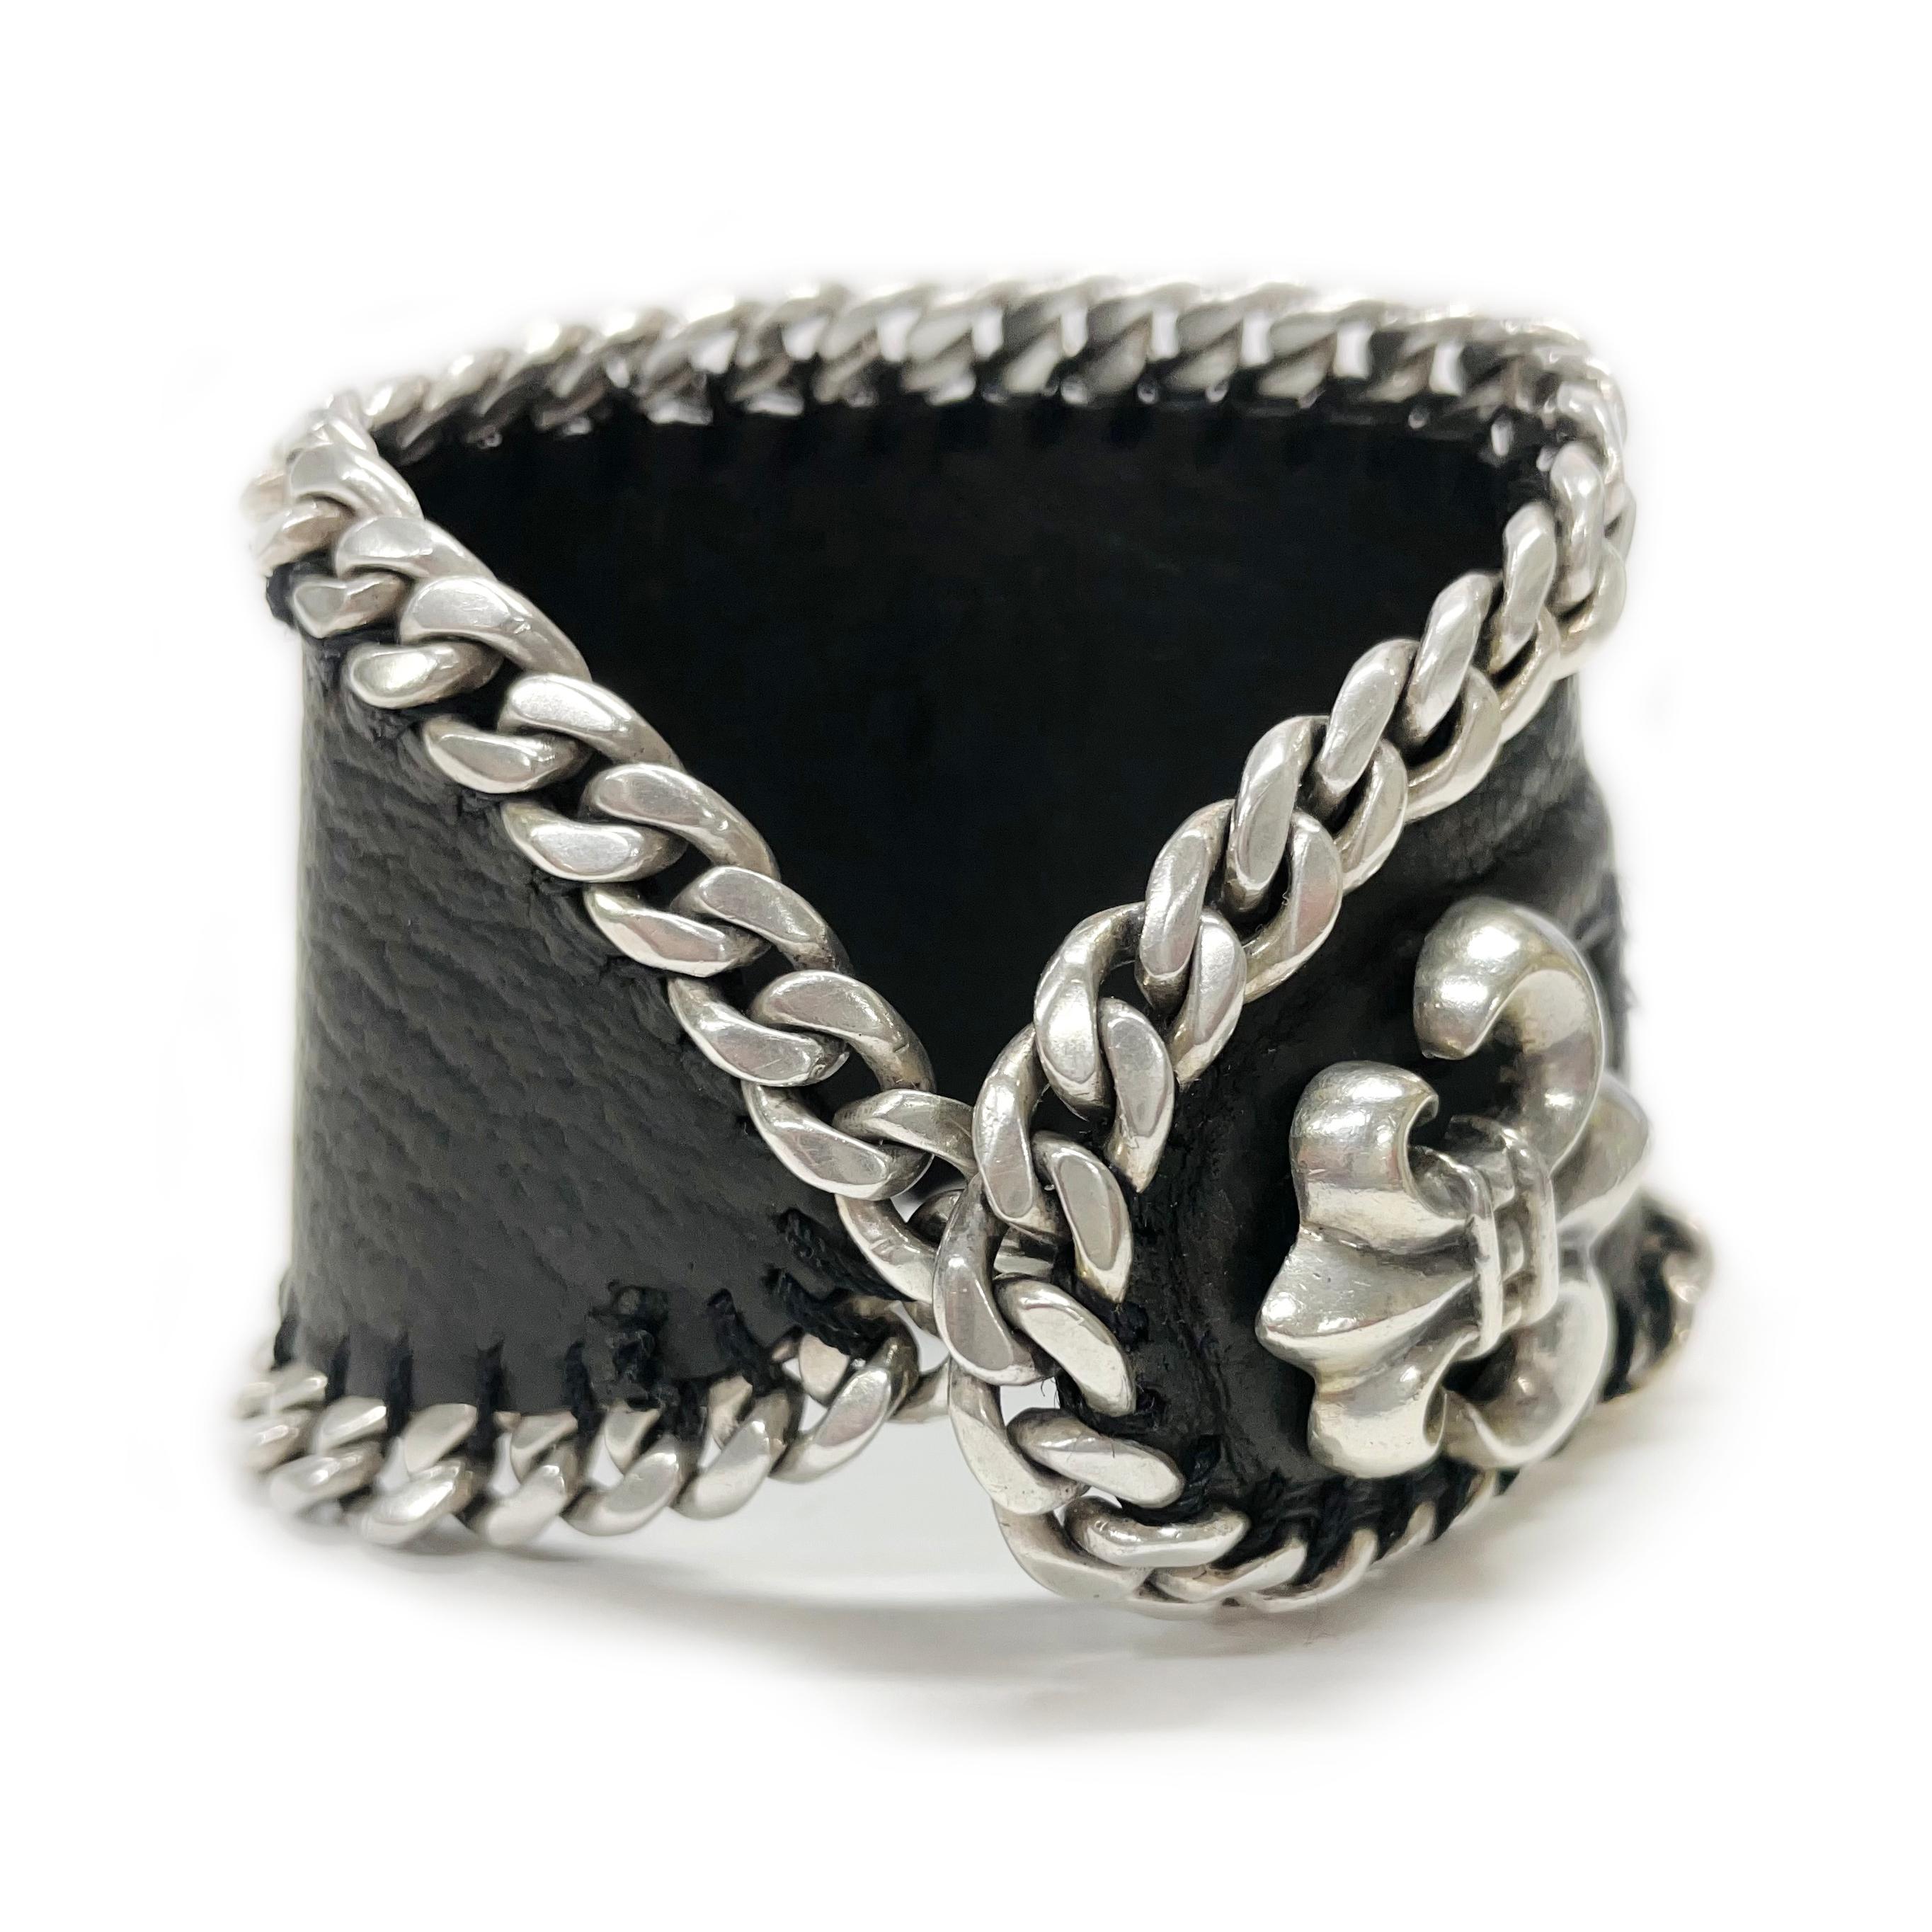 Chrome Hearts Silver Fleur de Lis Leather Bracelet. This unique bracelet features 925 silver curbed chain sewn into the edge of the black leather with a Silver Fleur de Lis charm serving as the toggle for the closure. Stamped on the charm/toggle is